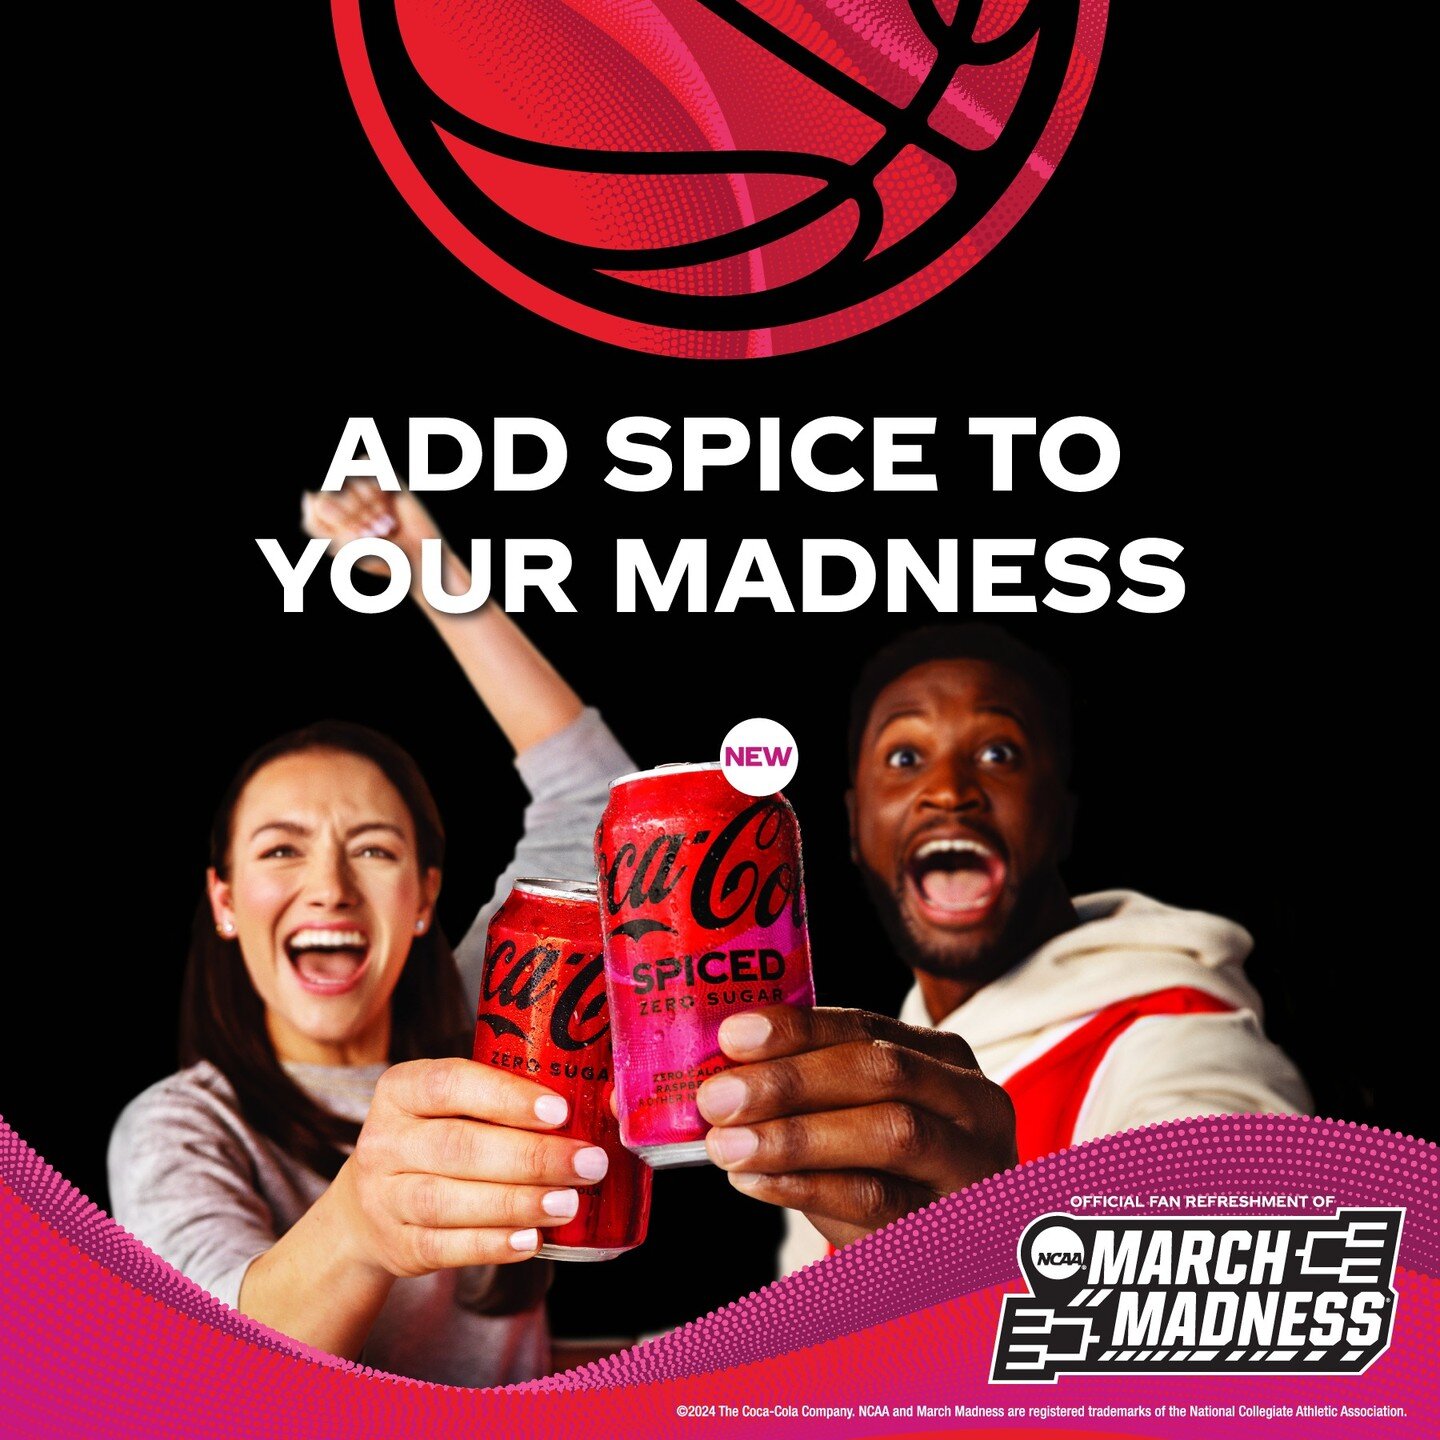 Spice up your bracket with new Coca-Cola Spiced!

Coca-Cola Zero Sugar is the Official Fan Refreshment of March Madness

#MarchMadness #CocaCola #CocaColaSpiced